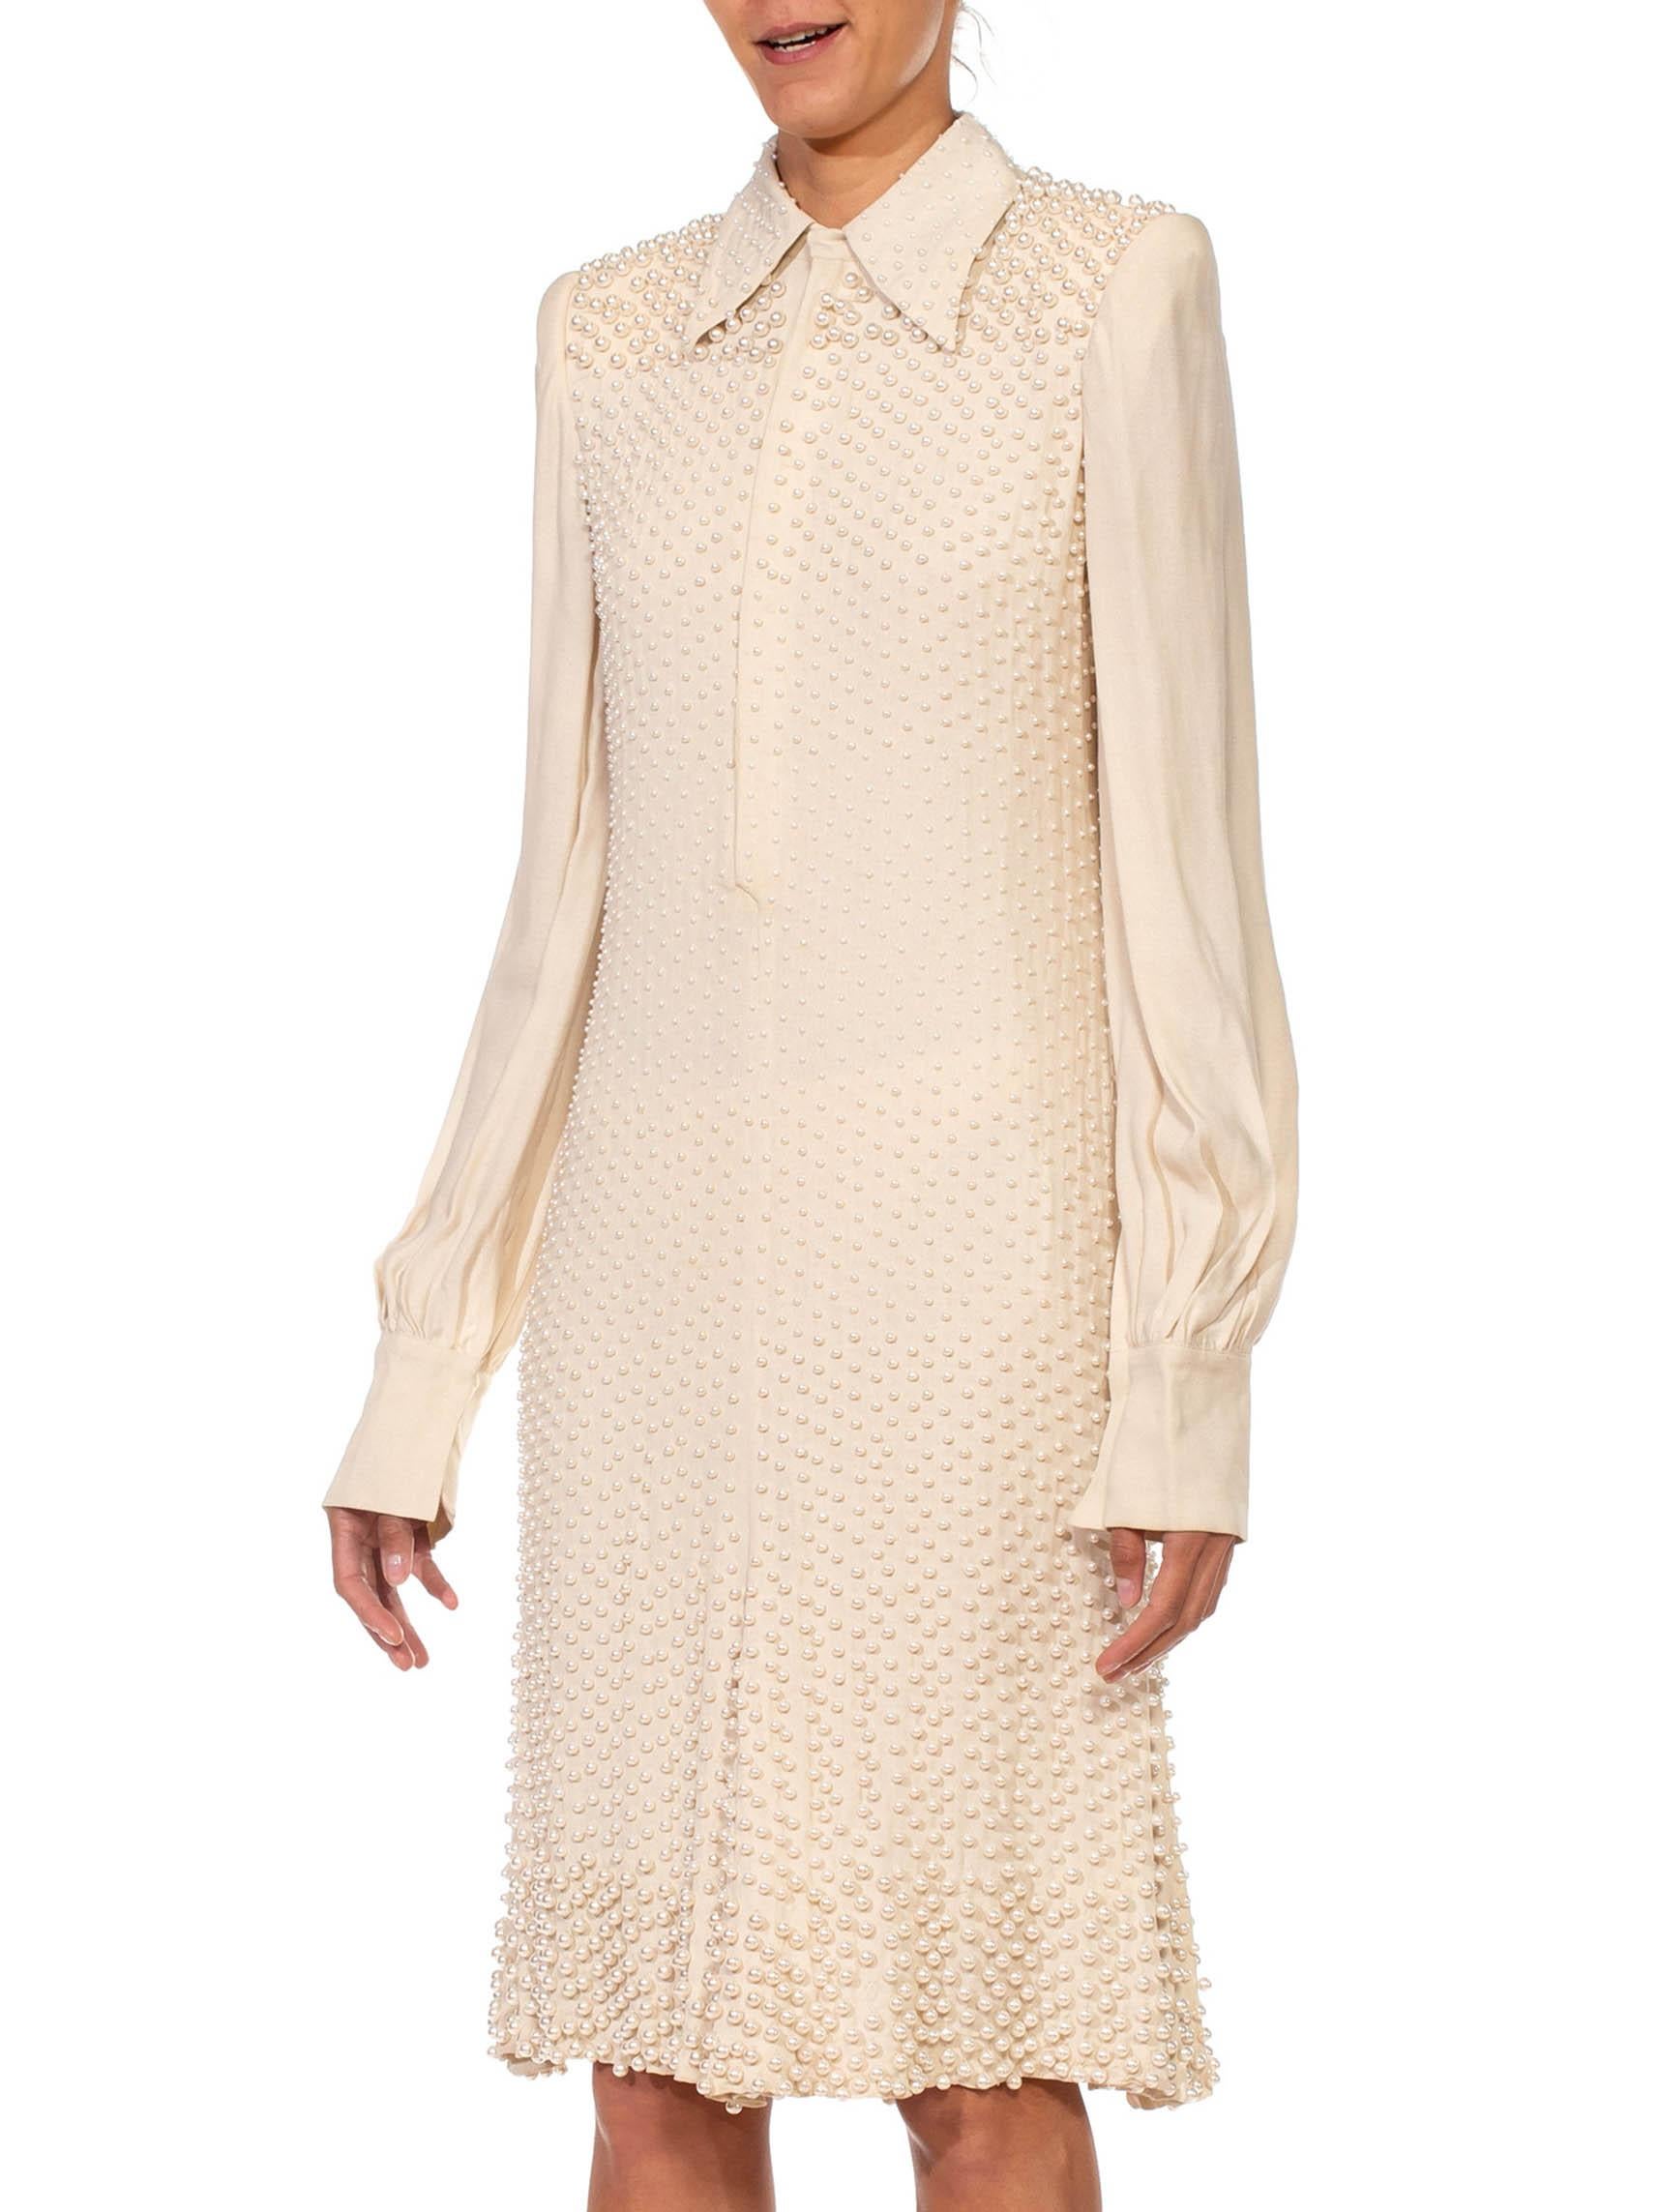 2000S JEAN PAUL GAULTIER Cream Silk Long Sleeved Cocktail Dress Covered In Pear In Excellent Condition For Sale In New York, NY